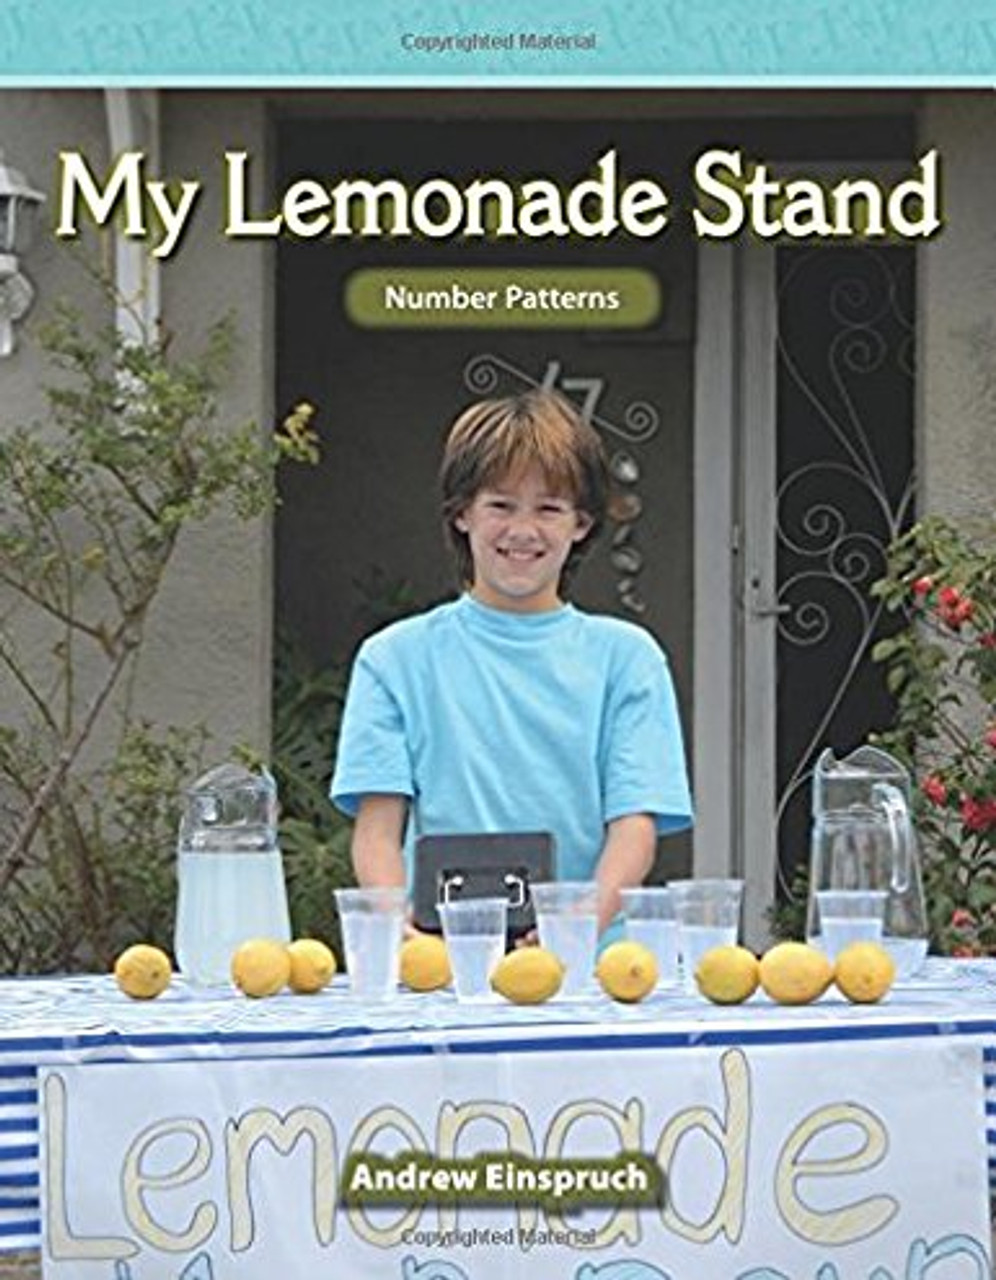 My Lemonade Stand by Andrew Einspruch